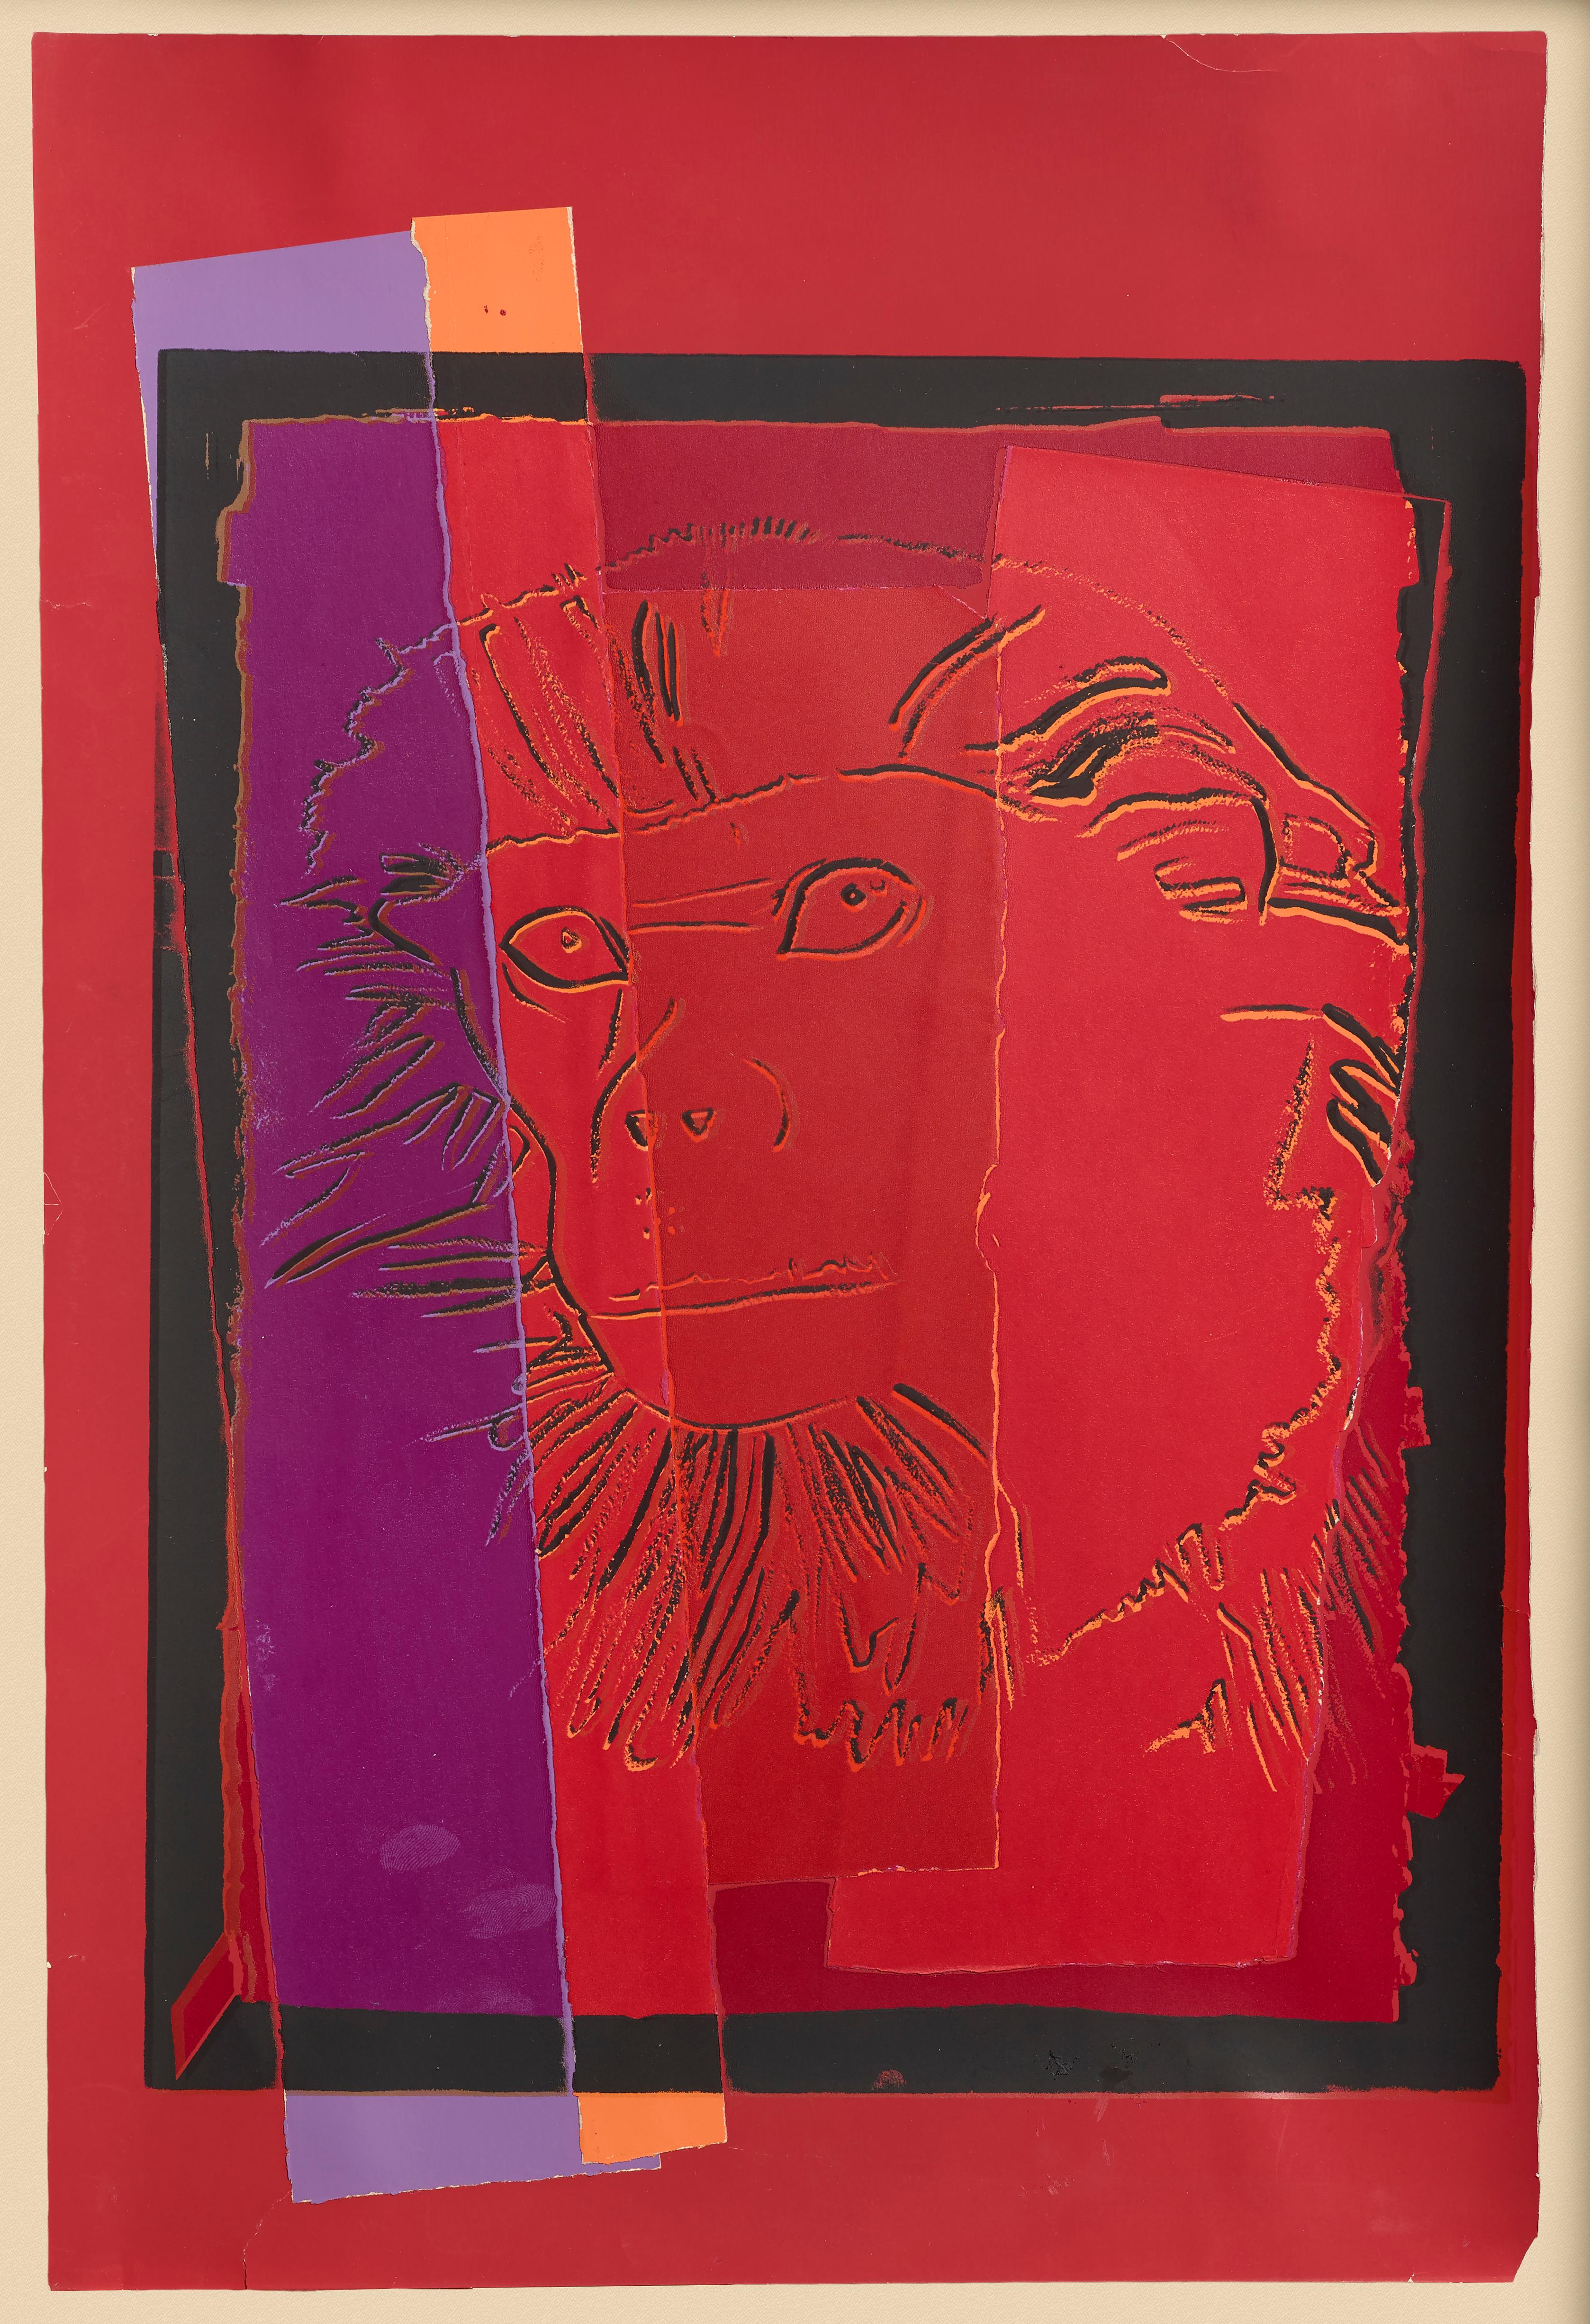 Andy Warhol, Douc Langur From Vanishing Animals, unique collage and silkscreen